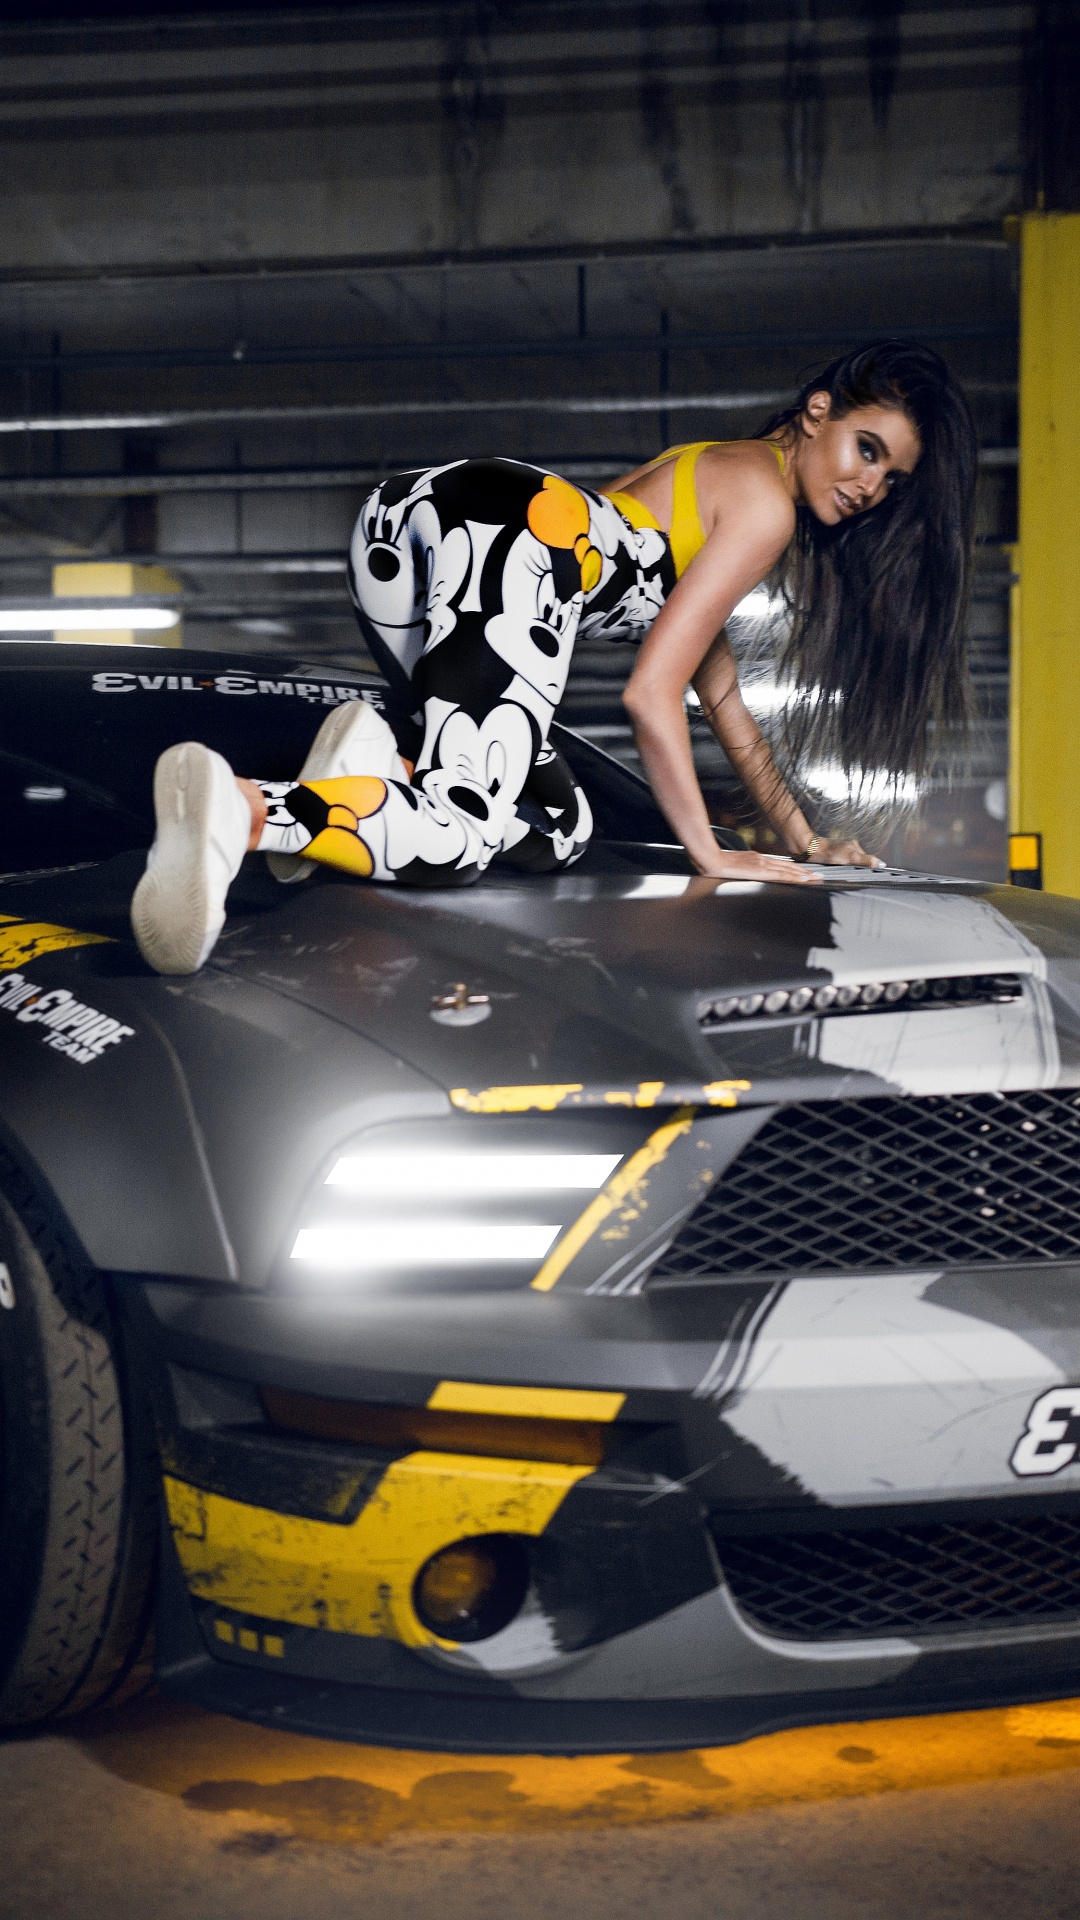 Woman in Black and White Floral Dress Riding on Black and Yellow Sports Car. Wallpaper in 1080x1920 Resolution